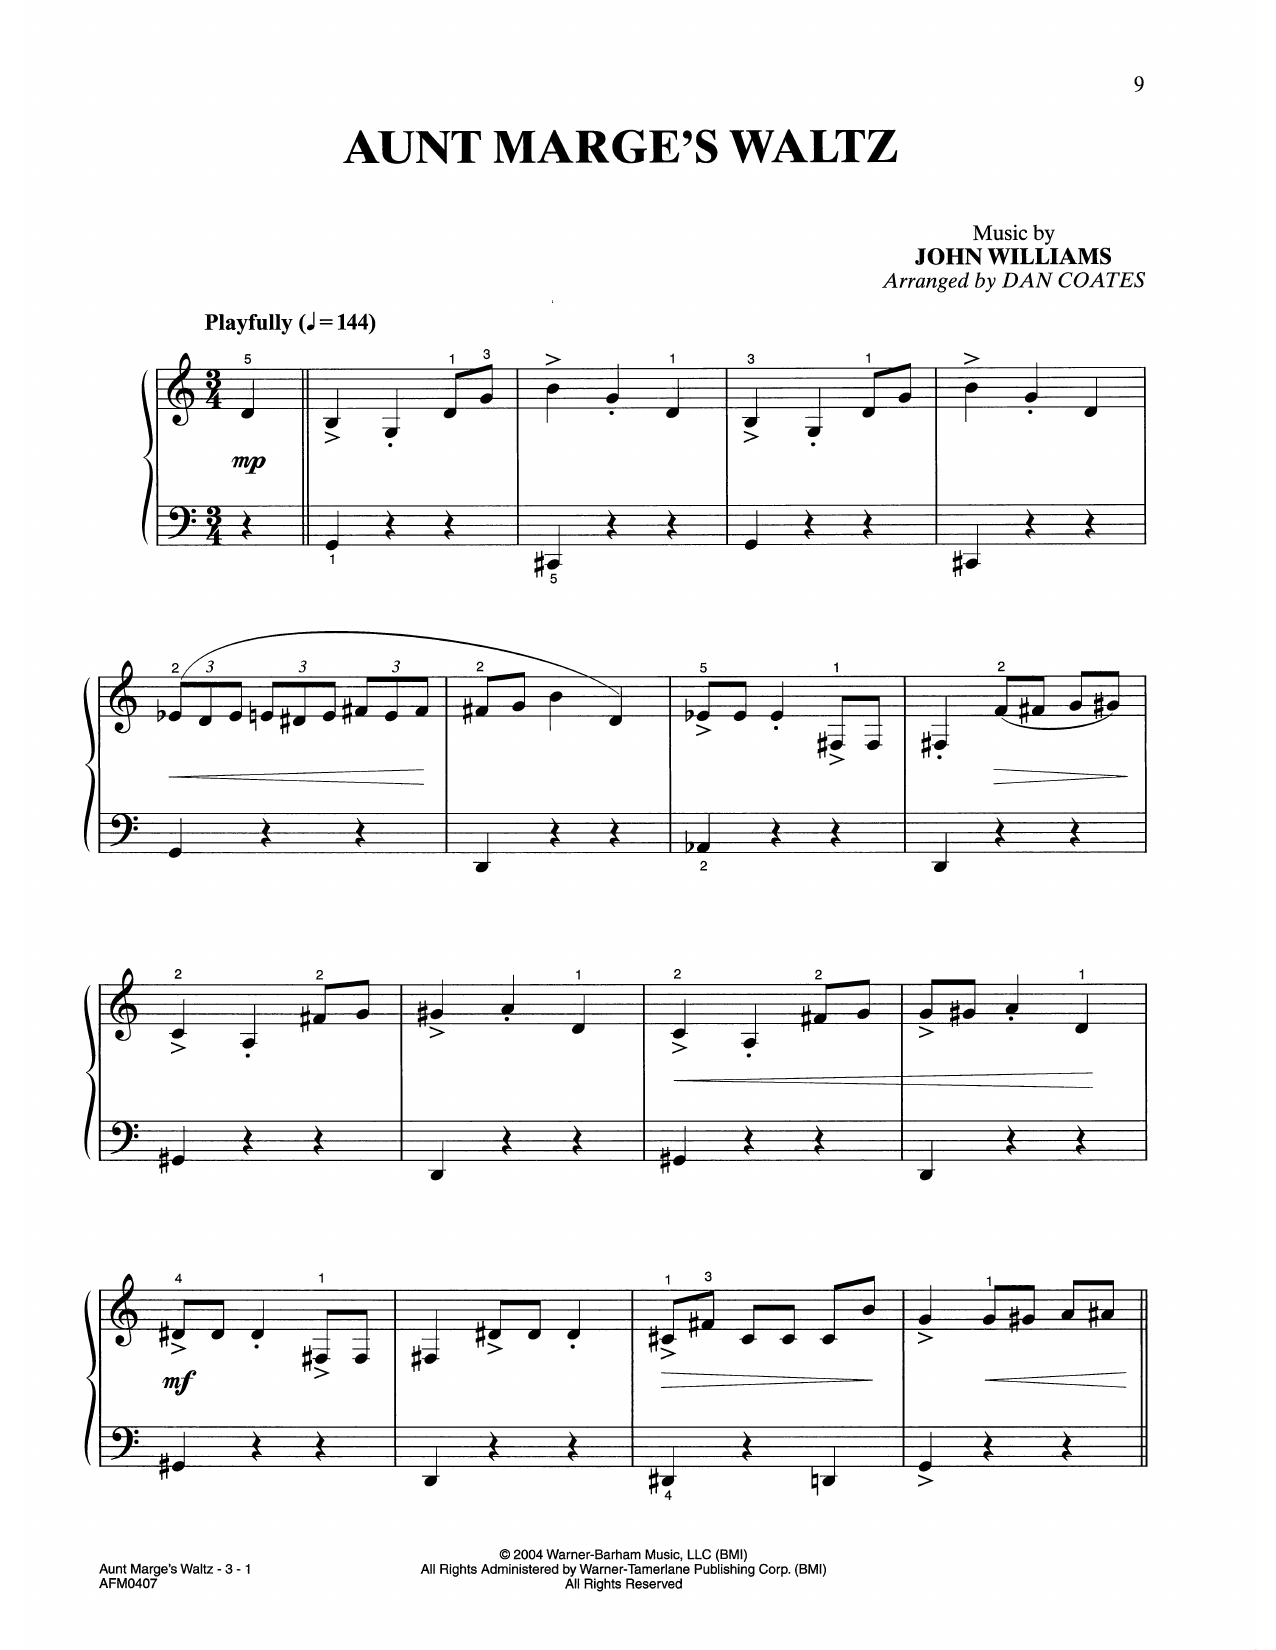 Download John Williams Aunt Marge's Waltz (from Harry Potter) Sheet Music